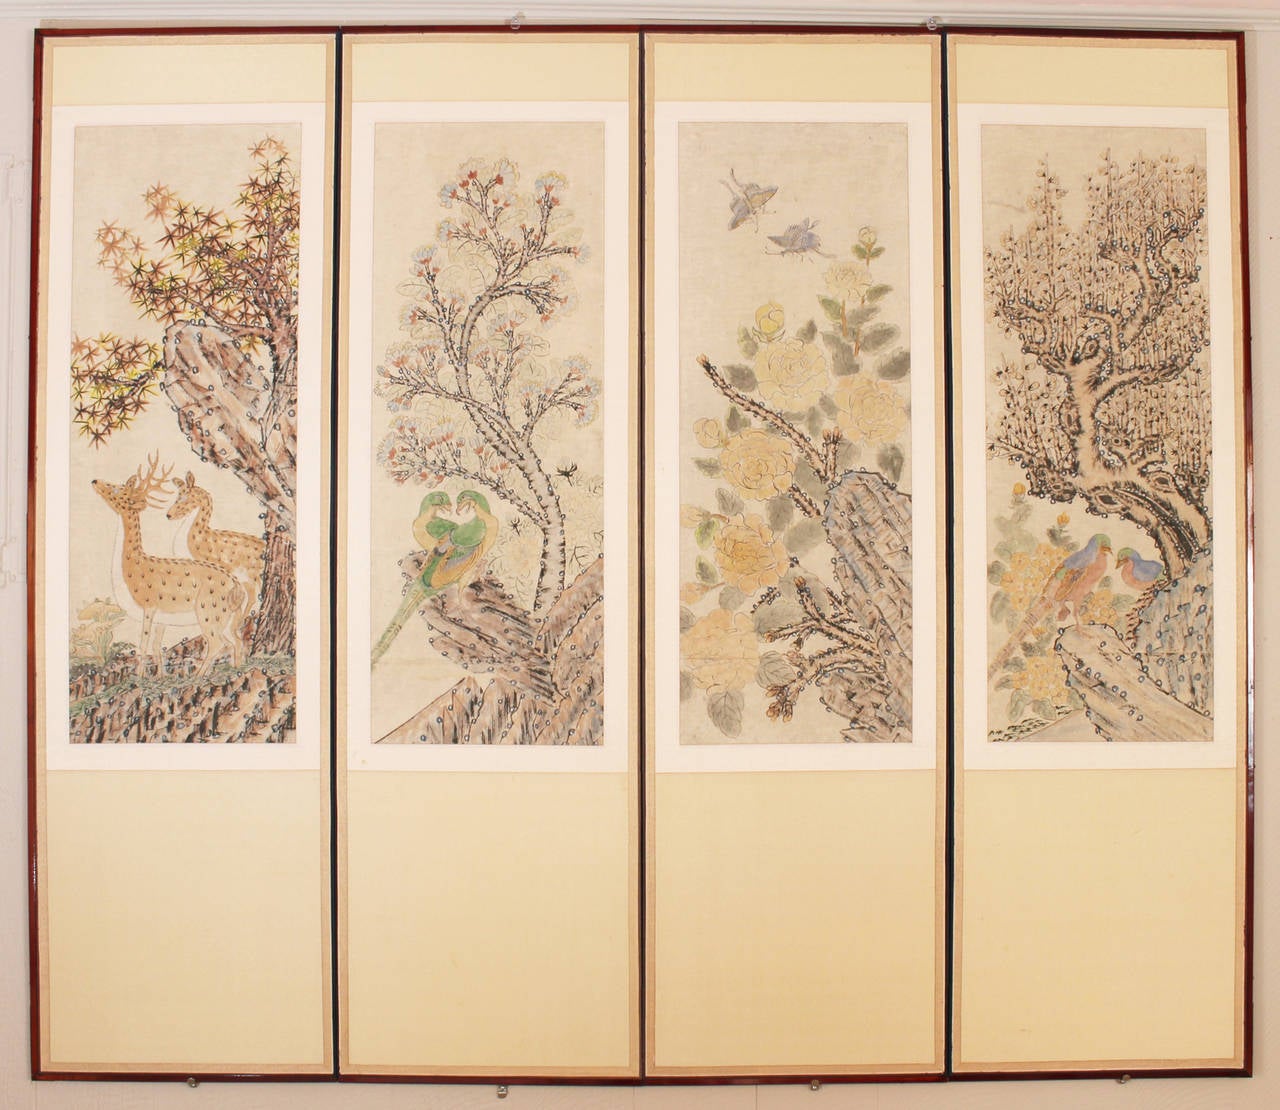 A four-panel folding screen inset with hand-painted scenes of birds and animals in a woodland setting surrounded by woven silk matting set in dark polished wood frame with brass fittings.